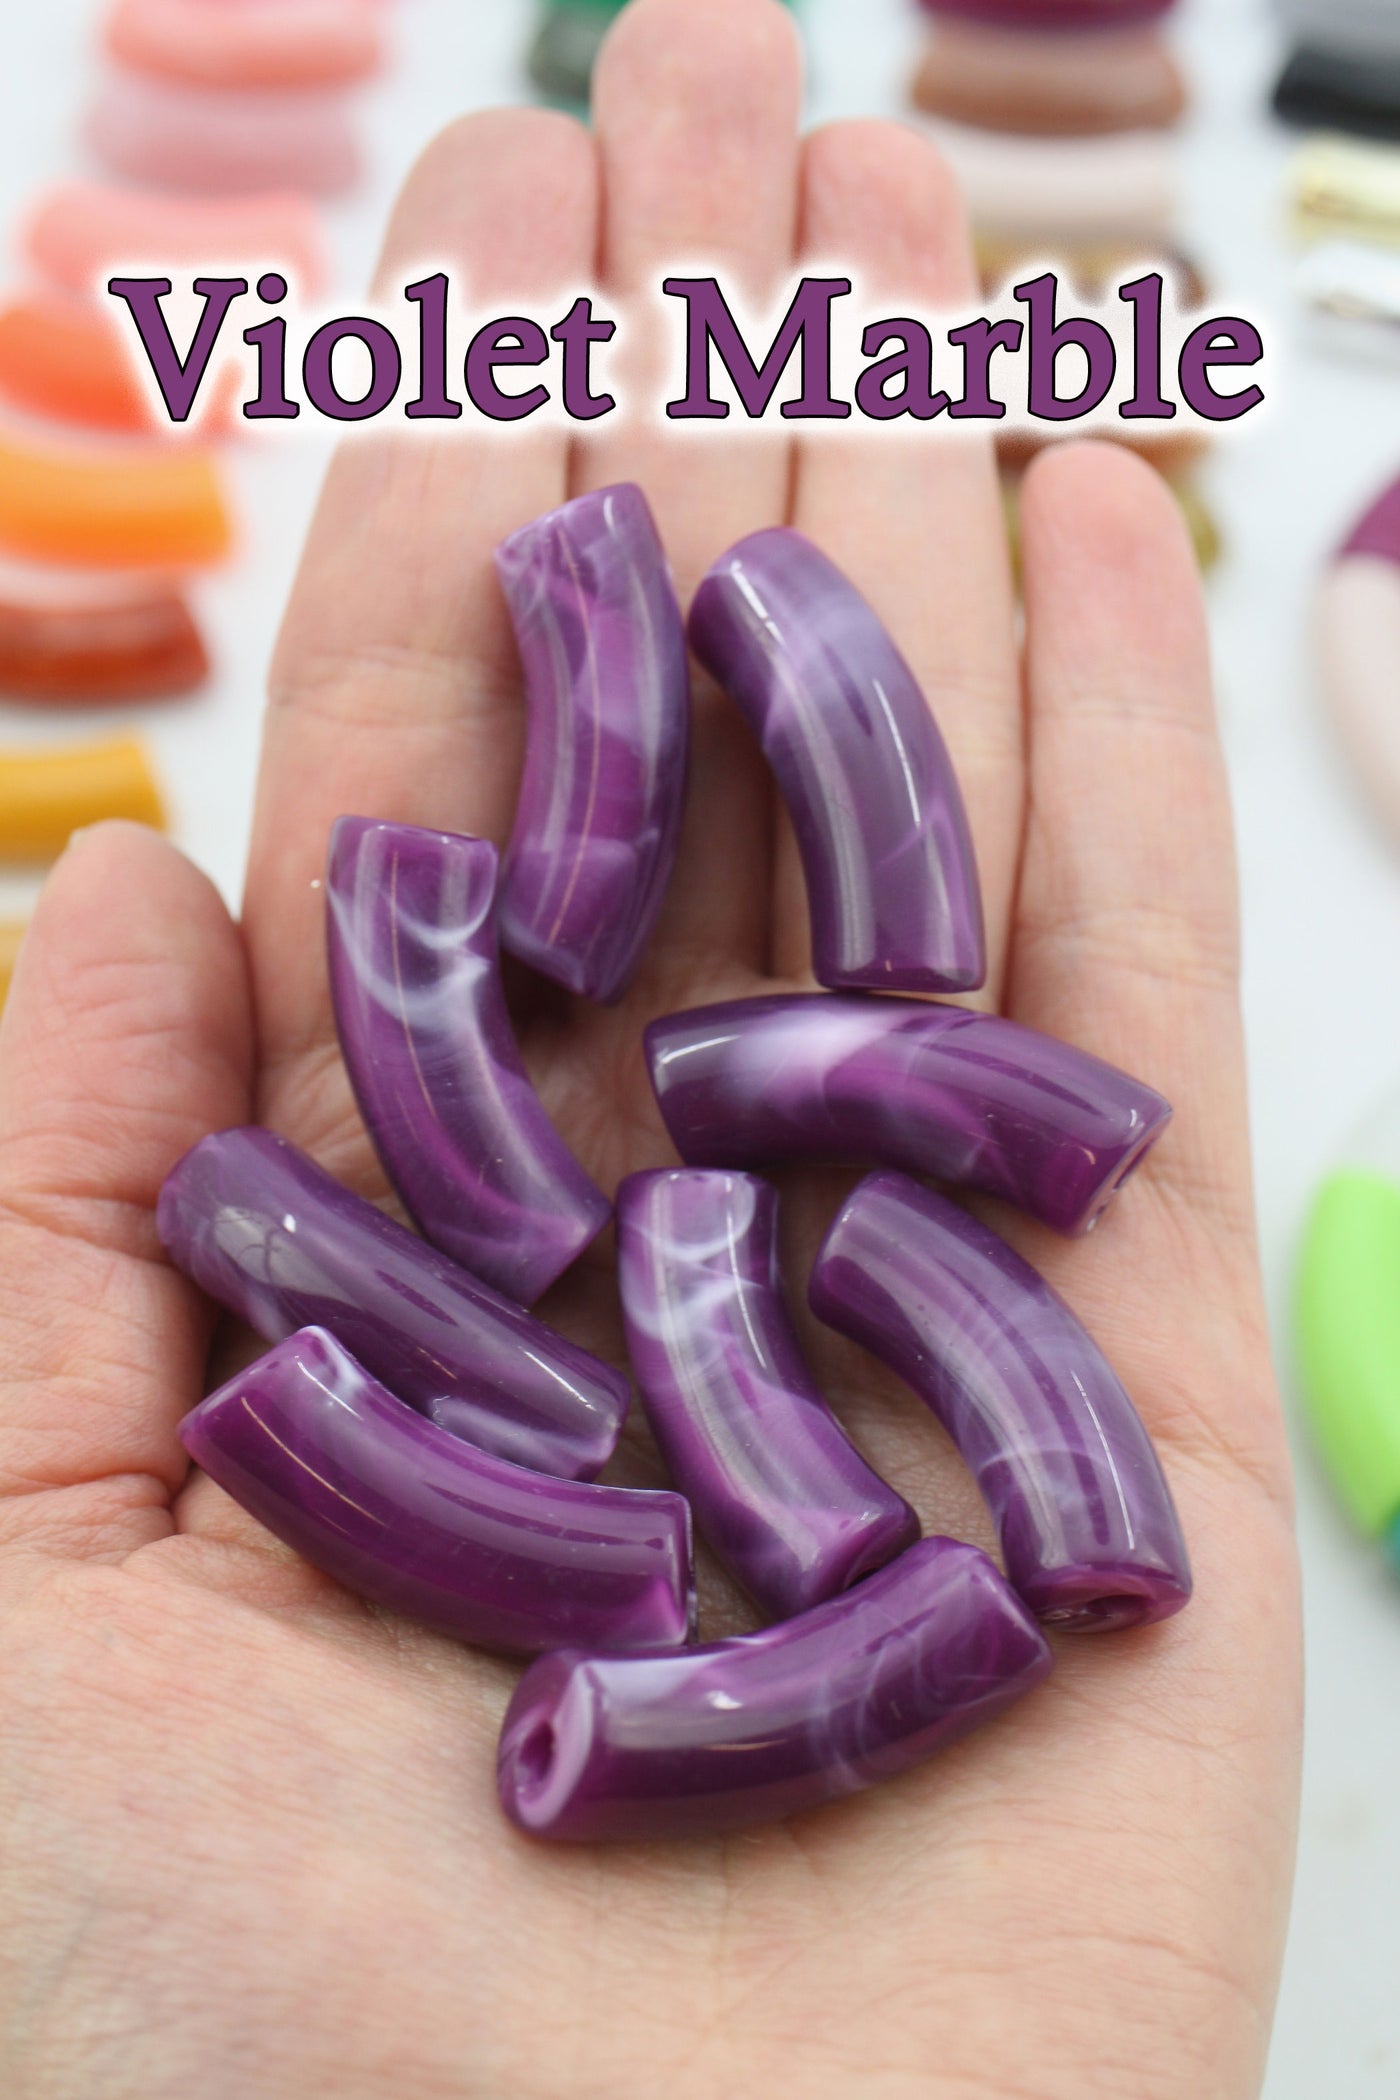 Violet Marble Acrylic Bamboo Beads, Curved Tube Beads, 12mm Colorful Bangle Beads